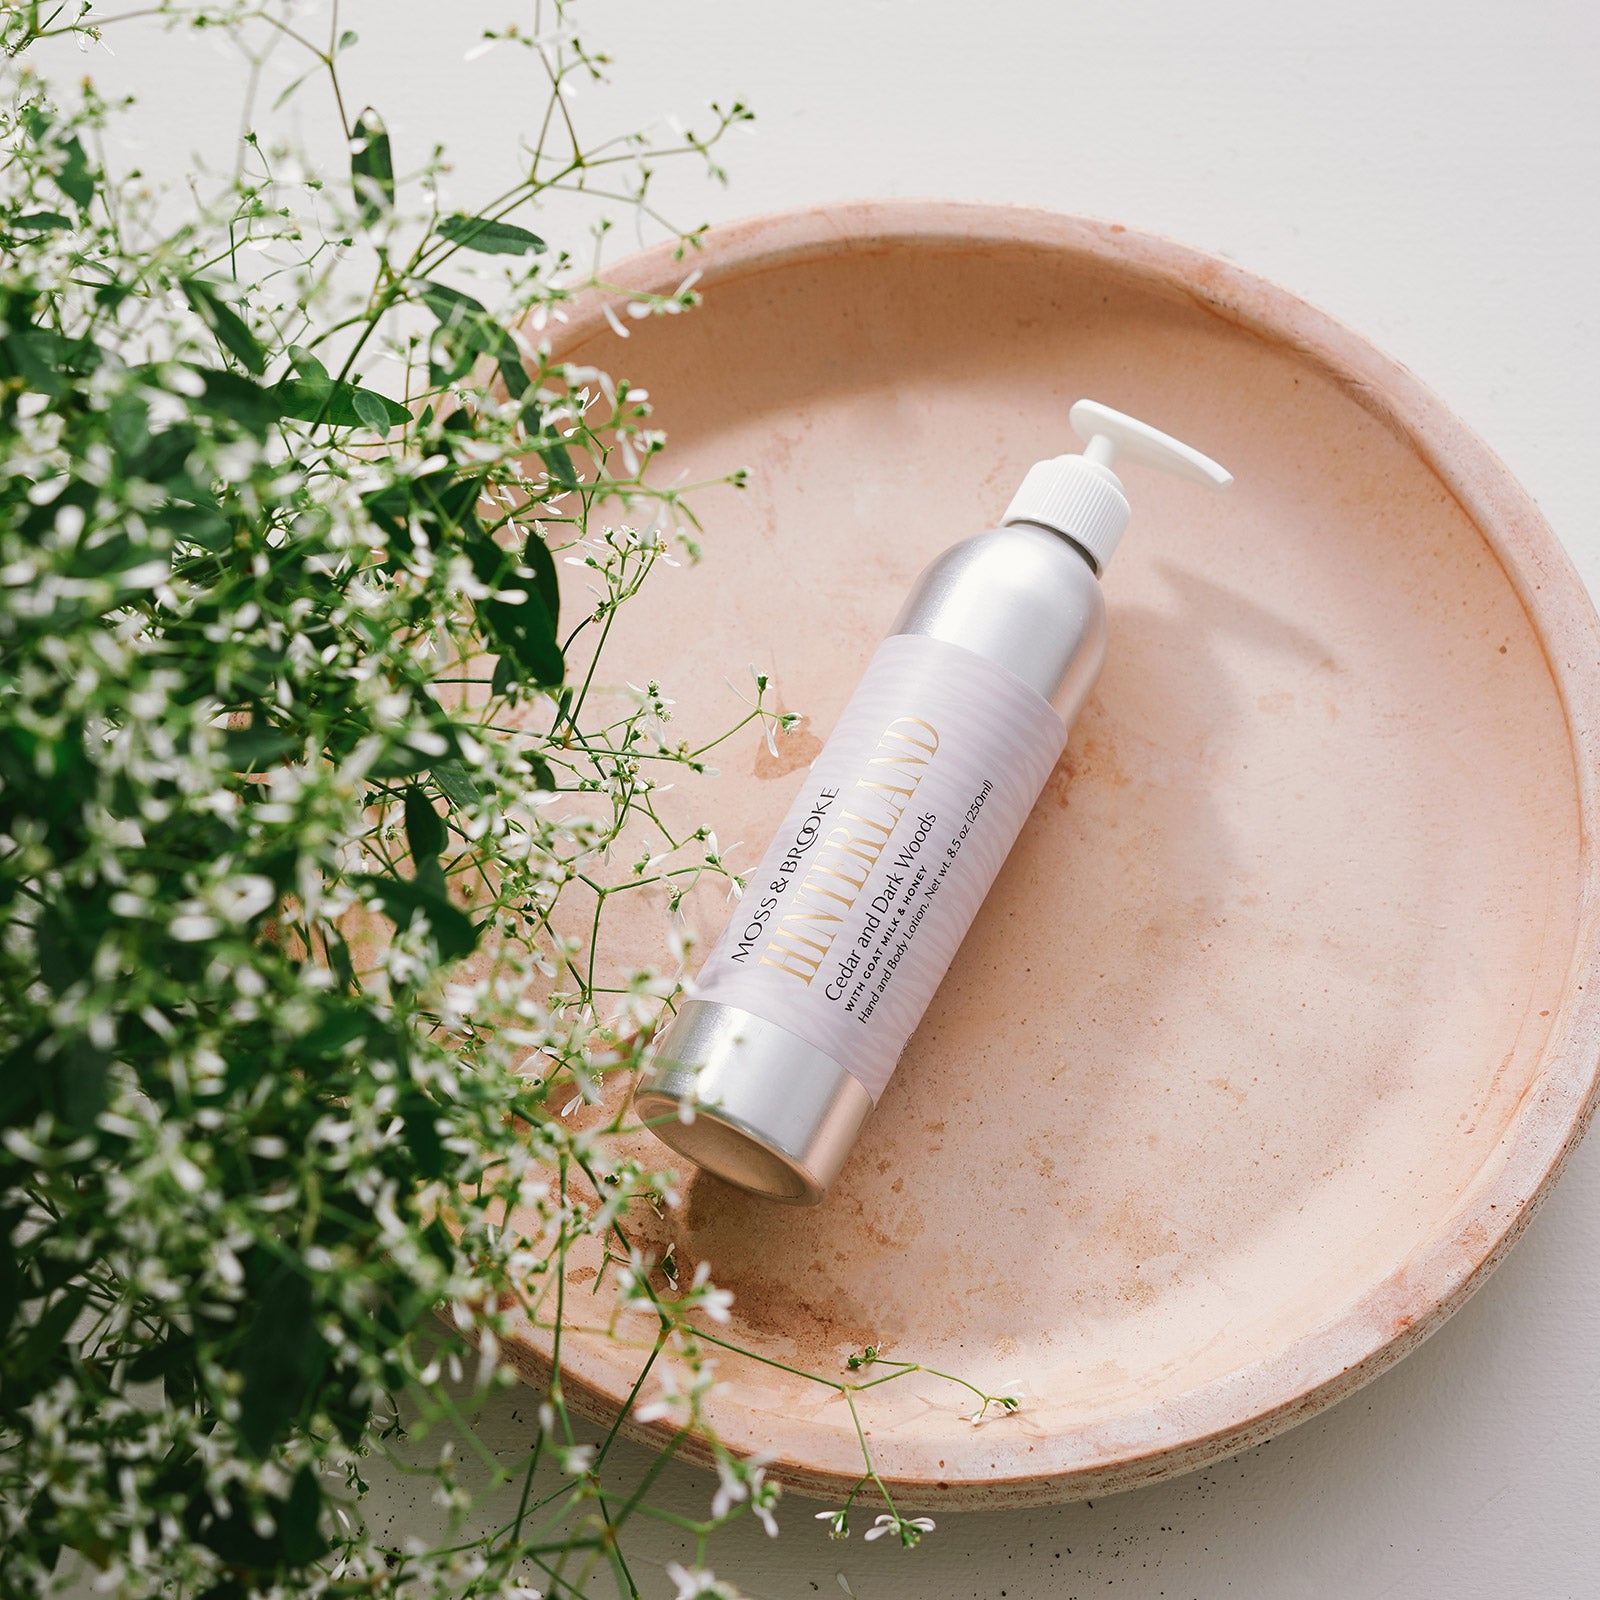 Moss & Brooke Hinterland body lotion is infused with botanical fragrance in a minimal photography background with small flowers.